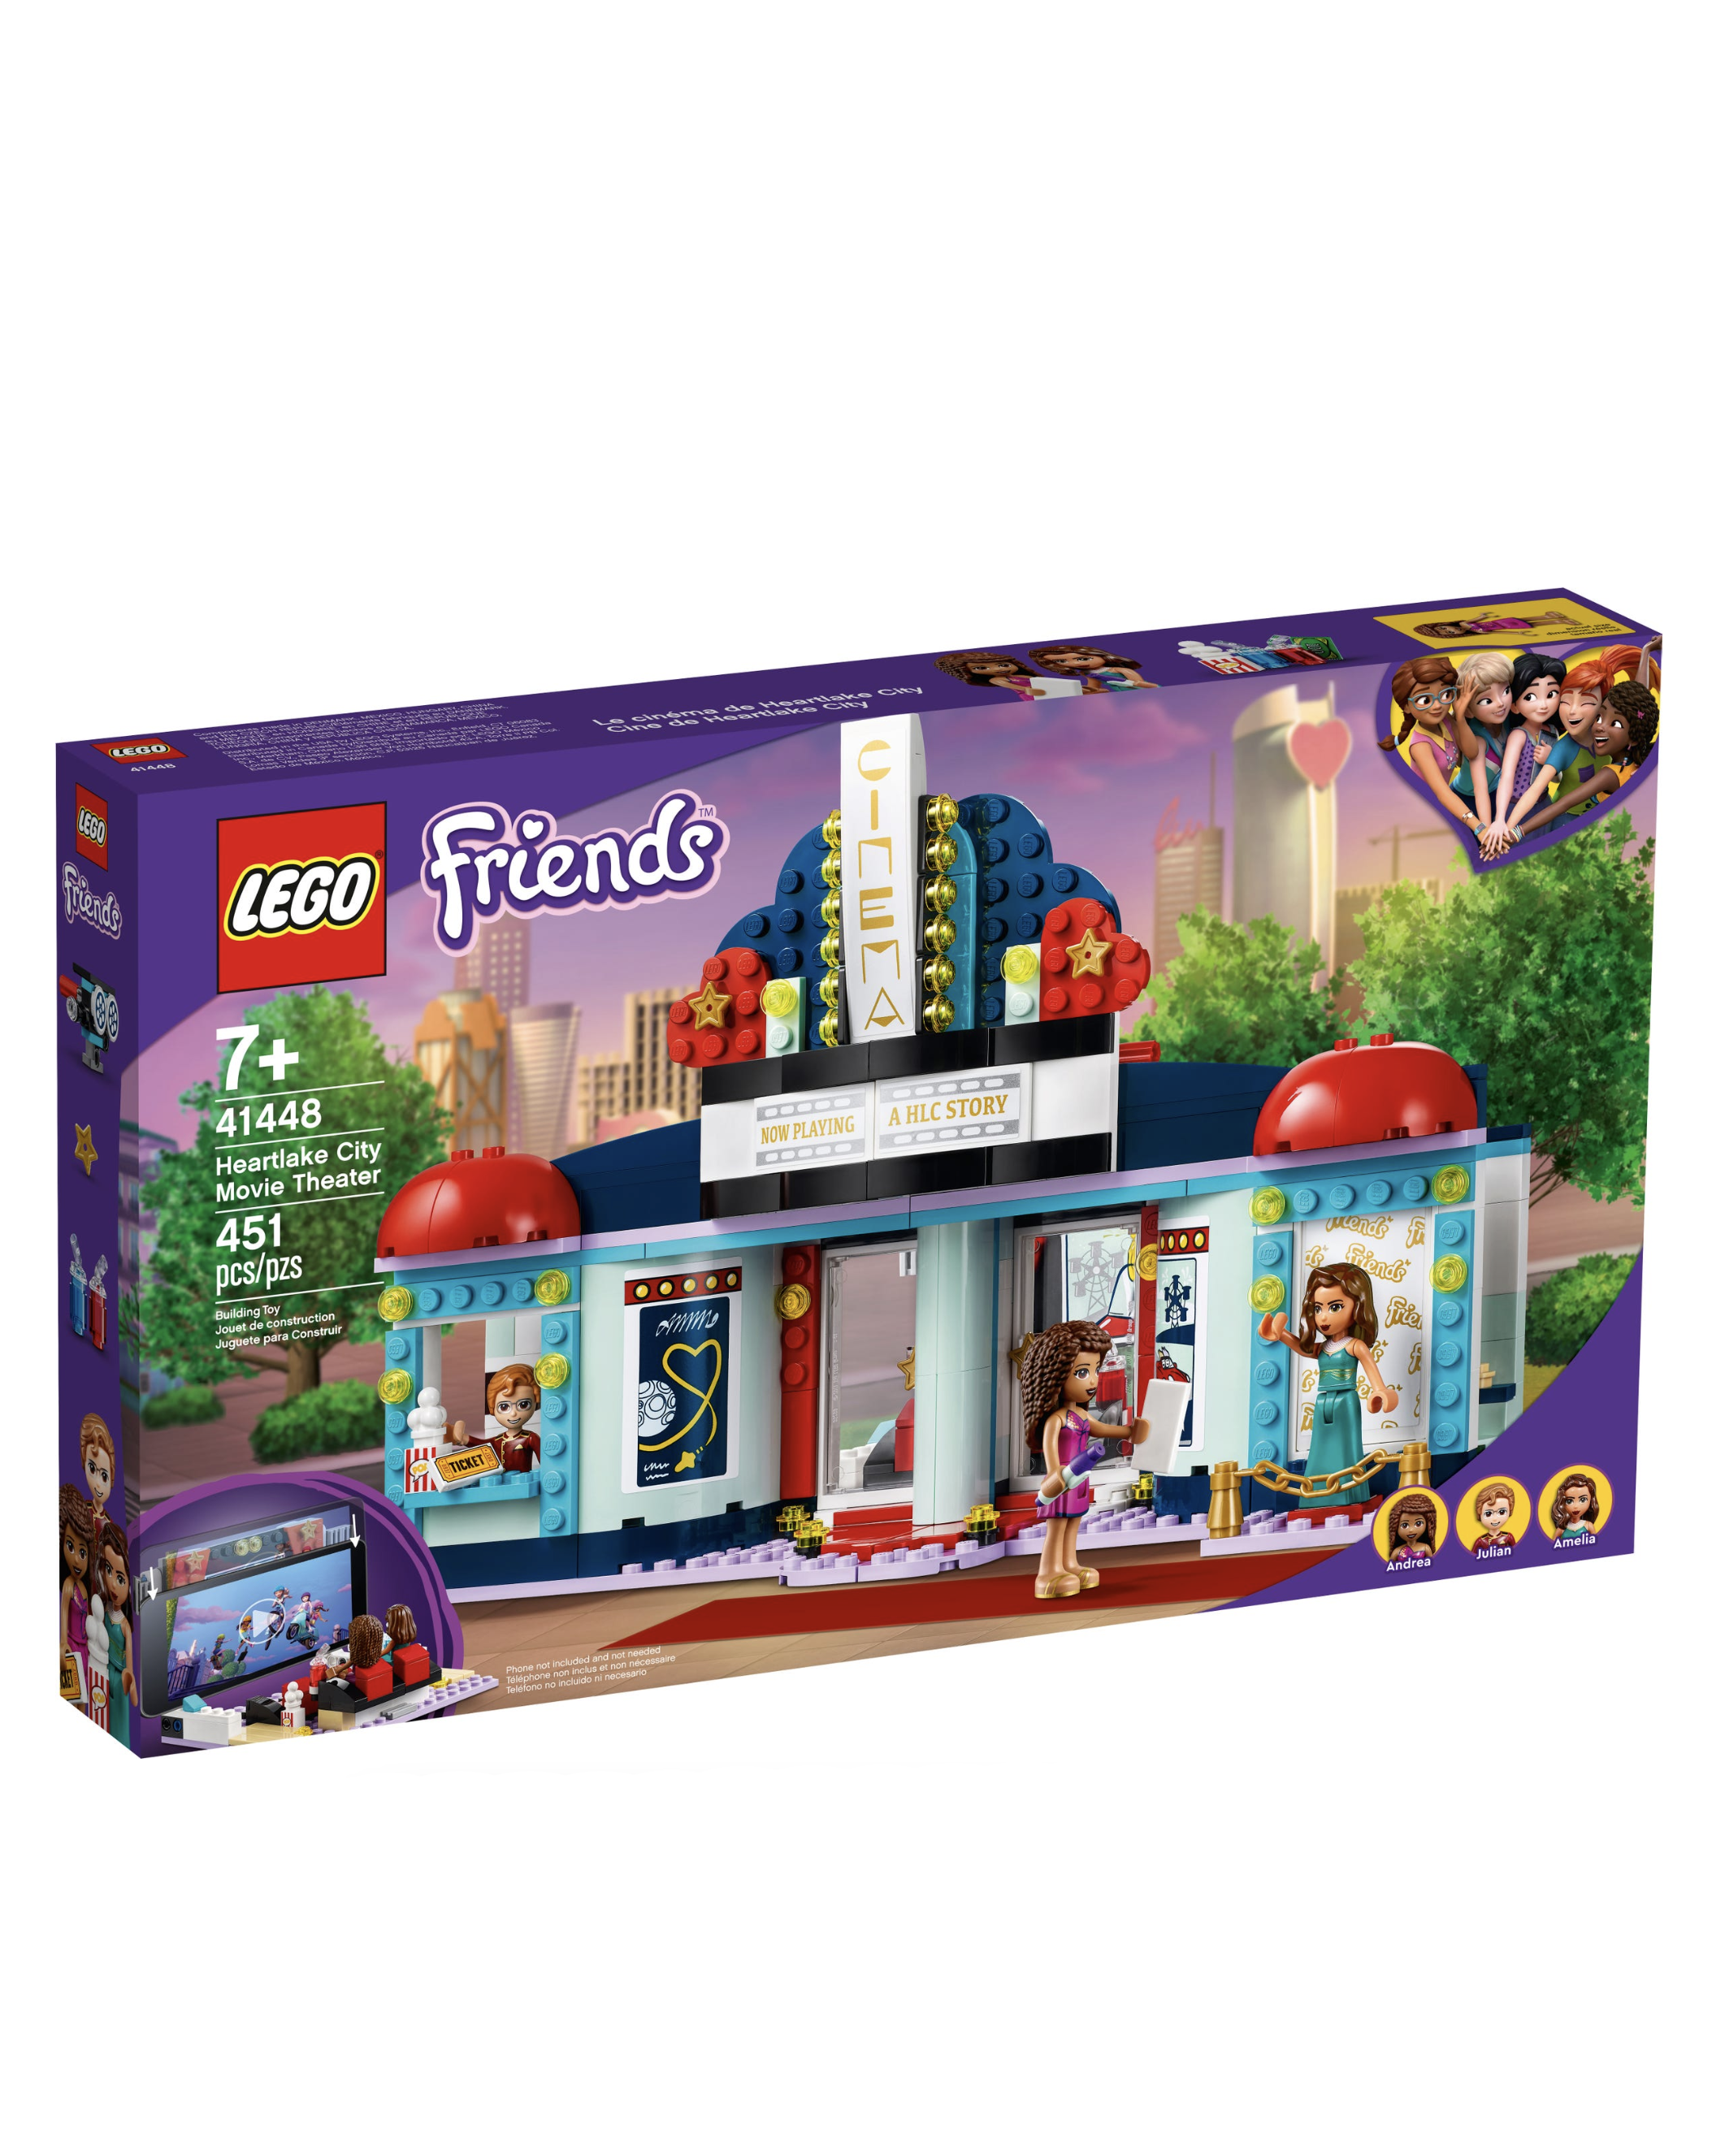 Heartlake City Movie Theater 41448 | LEGO - The Store Upstairs